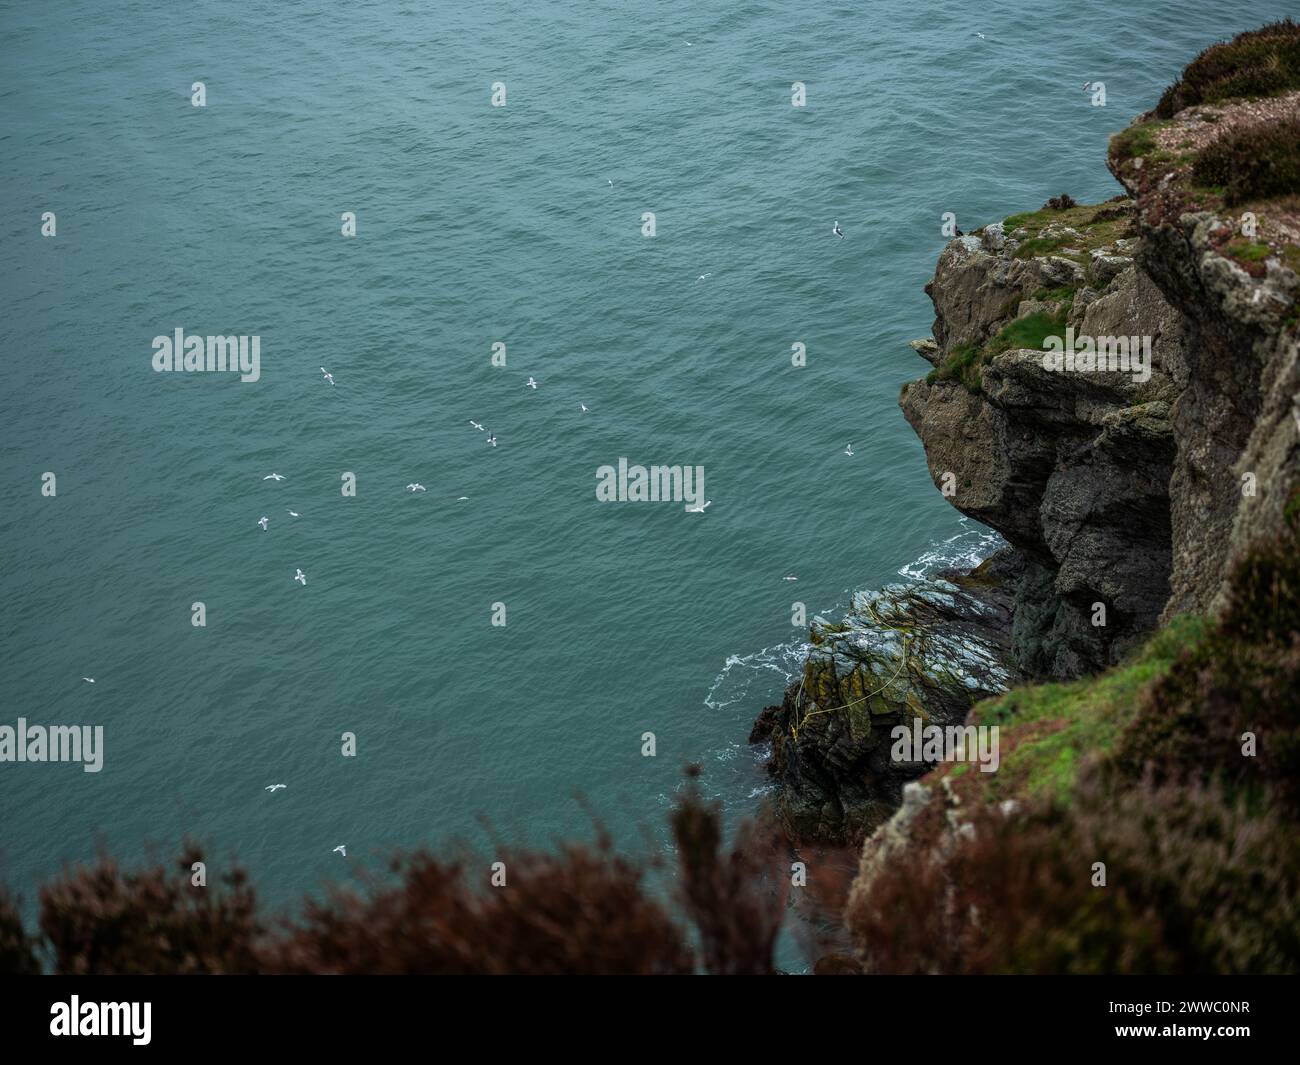 Seagulls flying around the cliffs at Howth Head, north of Dublin city, Ireland. Stock Photo